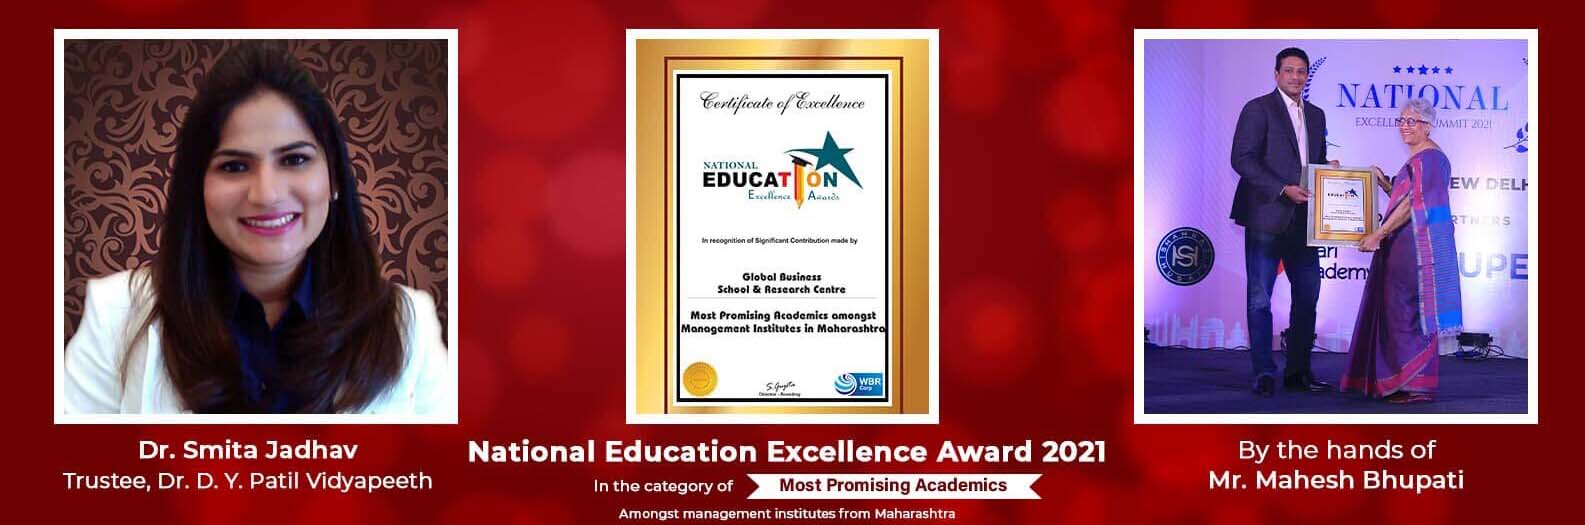 National Education Excellence Award 2021